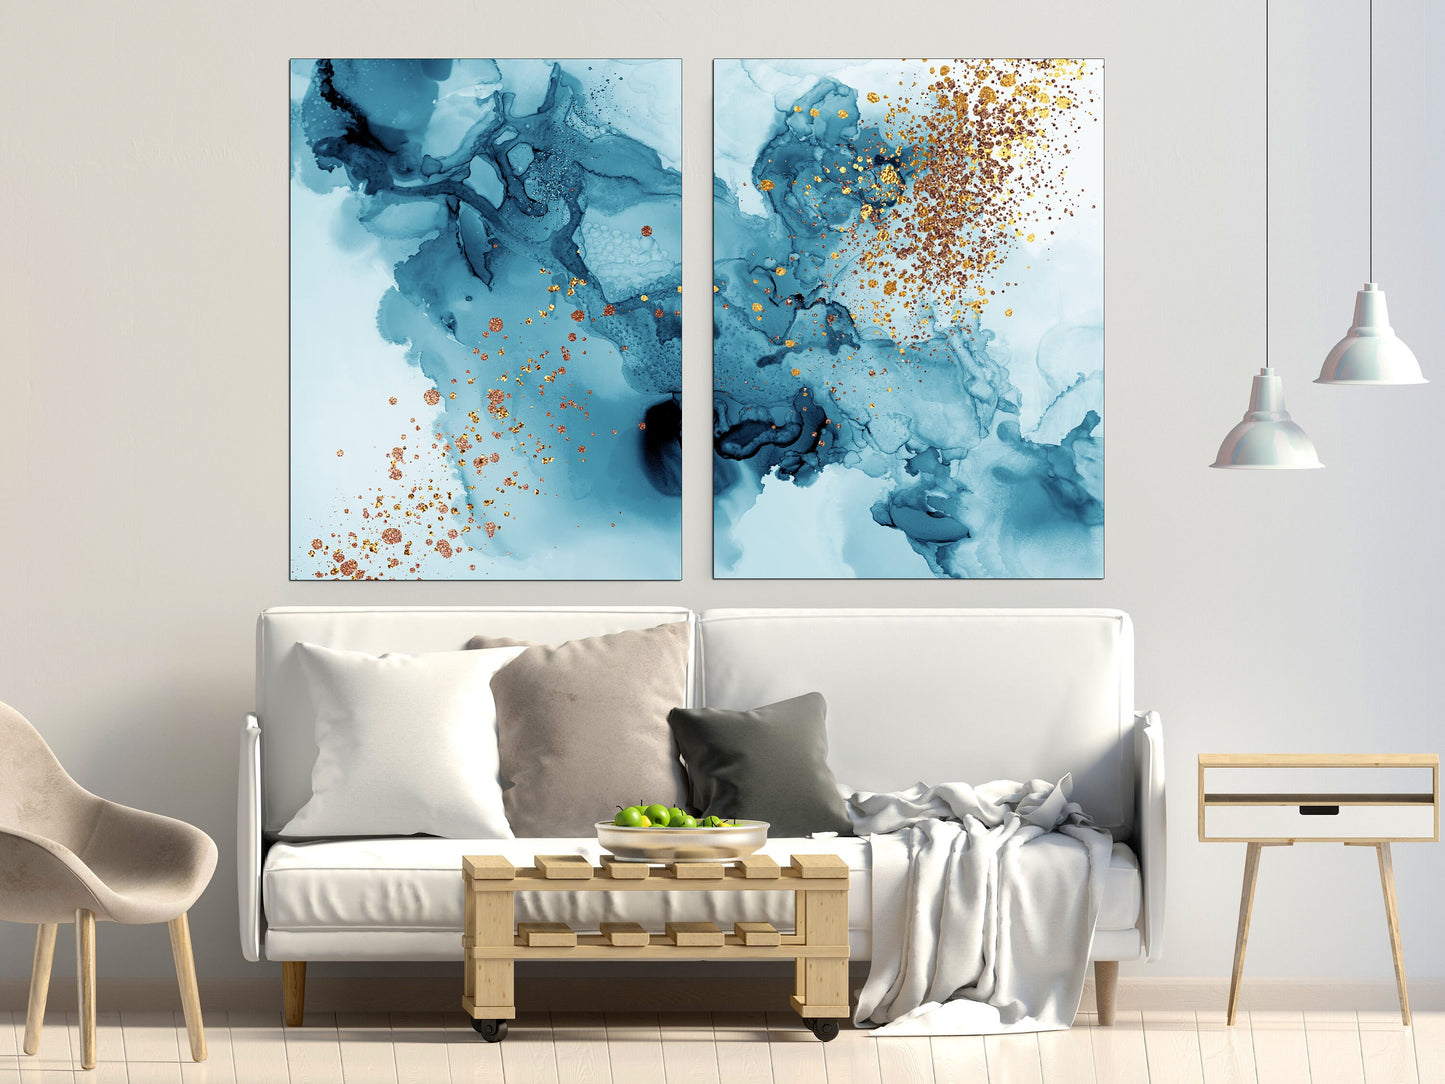 Abstract wall art paintings on canvas, abstract art print, multi panel wall ar,t abstract canvas, trendy wall art, large paintings